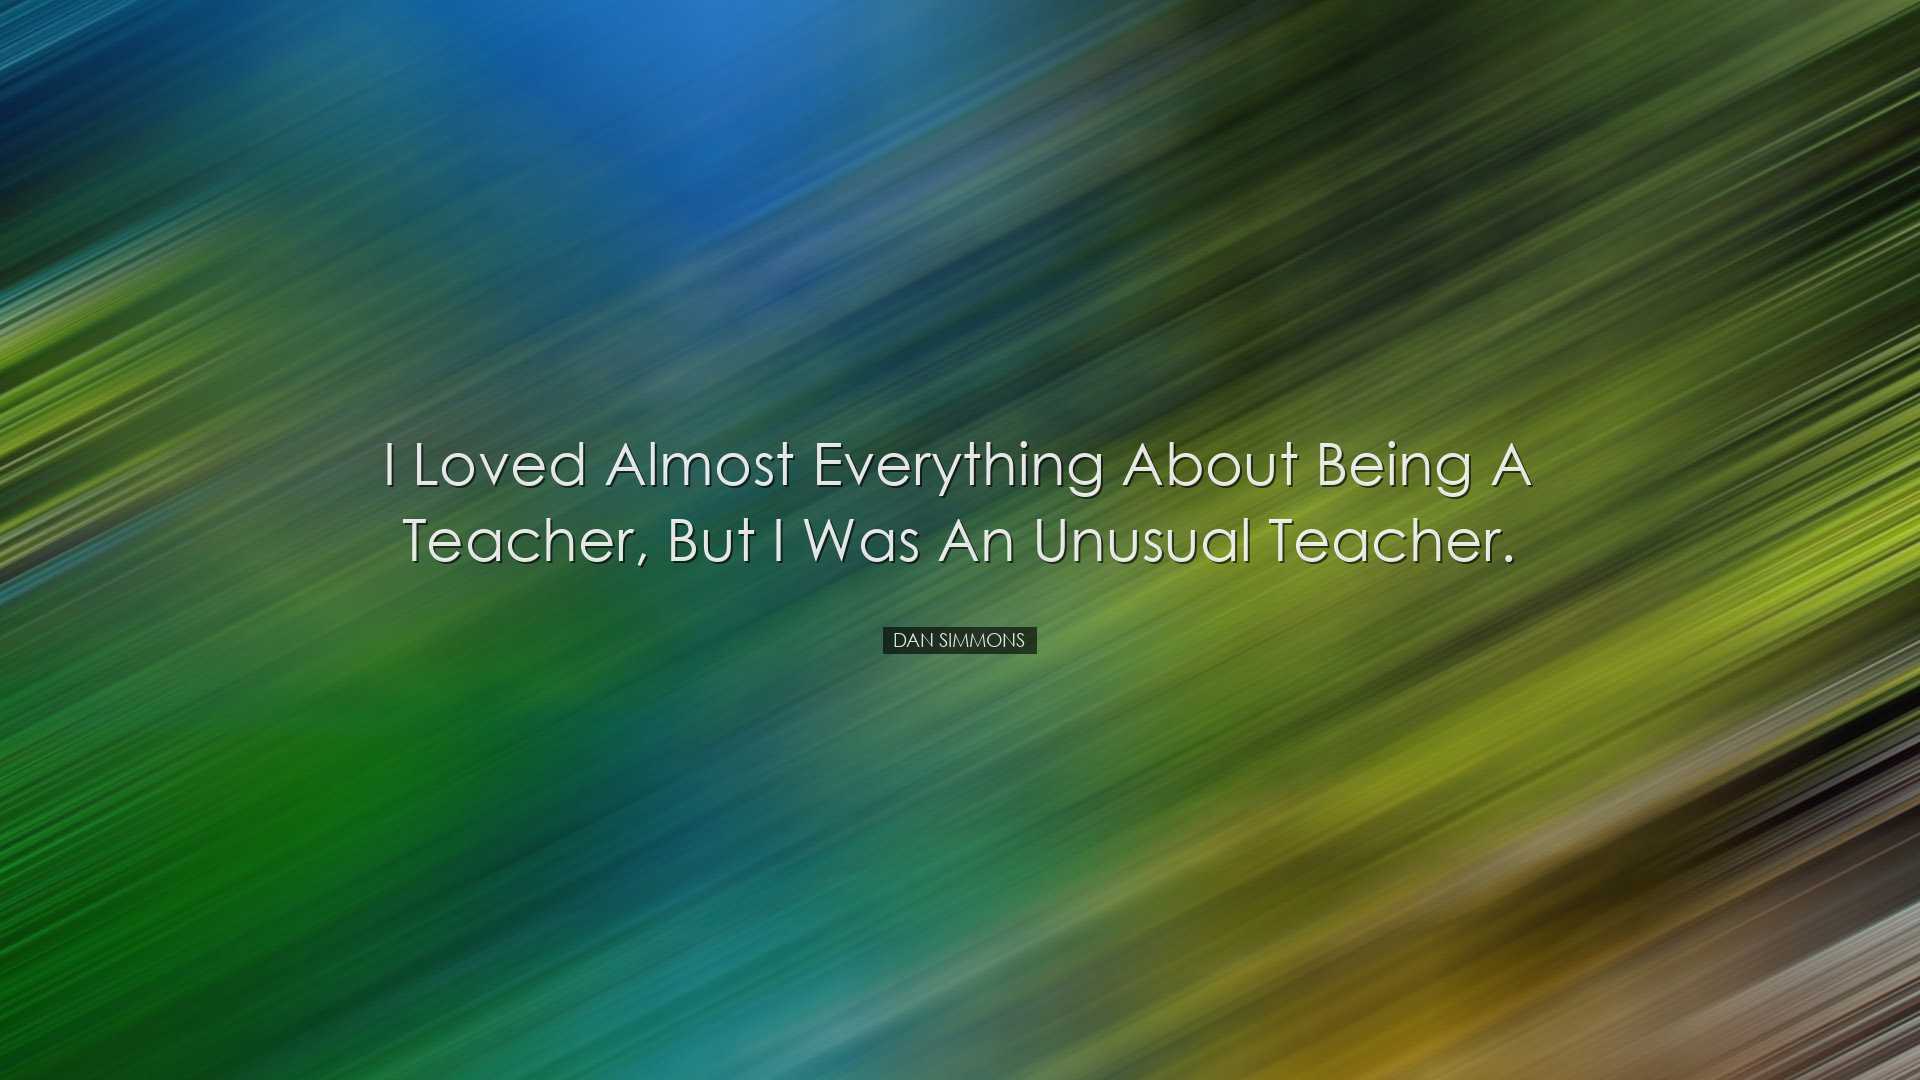 I loved almost everything about being a teacher, but I was an unus